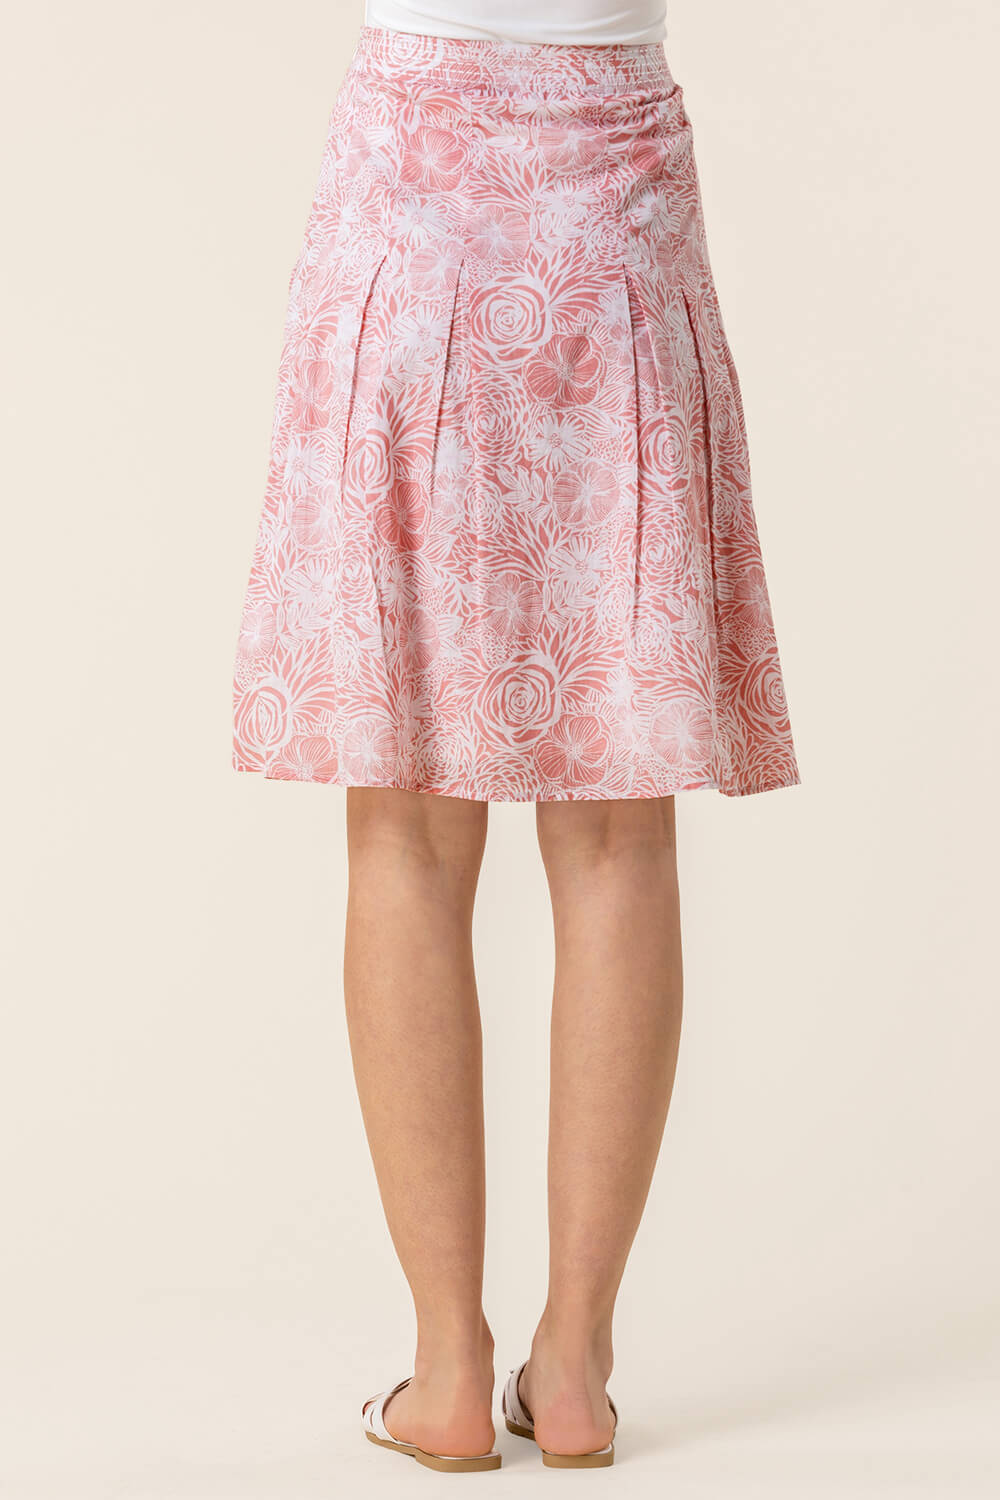 PINK Floral Print A-Line Cotton Skirt, Image 3 of 4